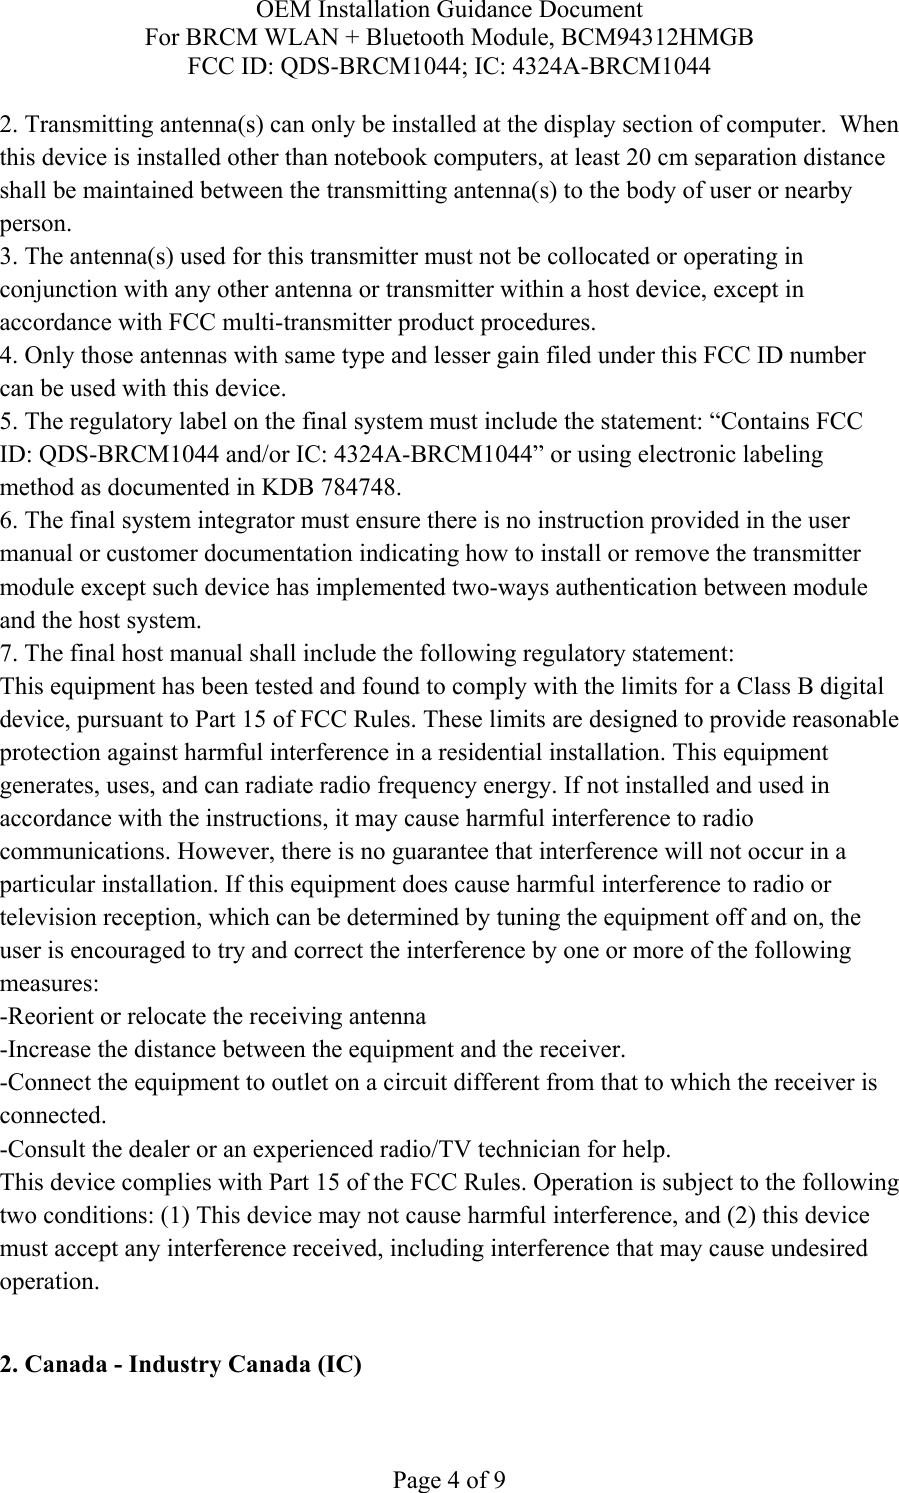 OEM Installation Guidance Document For BRCM WLAN + Bluetooth Module, BCM94312HMGB FCC ID: QDS-BRCM1044; IC: 4324A-BRCM1044  Page 4 of 9 2. Transmitting antenna(s) can only be installed at the display section of computer.  When this device is installed other than notebook computers, at least 20 cm separation distance shall be maintained between the transmitting antenna(s) to the body of user or nearby person. 3. The antenna(s) used for this transmitter must not be collocated or operating in conjunction with any other antenna or transmitter within a host device, except in accordance with FCC multi-transmitter product procedures. 4. Only those antennas with same type and lesser gain filed under this FCC ID number can be used with this device. 5. The regulatory label on the final system must include the statement: “Contains FCC ID: QDS-BRCM1044 and/or IC: 4324A-BRCM1044” or using electronic labeling method as documented in KDB 784748. 6. The final system integrator must ensure there is no instruction provided in the user manual or customer documentation indicating how to install or remove the transmitter module except such device has implemented two-ways authentication between module and the host system. 7. The final host manual shall include the following regulatory statement: This equipment has been tested and found to comply with the limits for a Class B digital device, pursuant to Part 15 of FCC Rules. These limits are designed to provide reasonable protection against harmful interference in a residential installation. This equipment generates, uses, and can radiate radio frequency energy. If not installed and used in accordance with the instructions, it may cause harmful interference to radio communications. However, there is no guarantee that interference will not occur in a particular installation. If this equipment does cause harmful interference to radio or television reception, which can be determined by tuning the equipment off and on, the user is encouraged to try and correct the interference by one or more of the following measures: -Reorient or relocate the receiving antenna -Increase the distance between the equipment and the receiver. -Connect the equipment to outlet on a circuit different from that to which the receiver is connected. -Consult the dealer or an experienced radio/TV technician for help. This device complies with Part 15 of the FCC Rules. Operation is subject to the following two conditions: (1) This device may not cause harmful interference, and (2) this device must accept any interference received, including interference that may cause undesired operation.  2. Canada - Industry Canada (IC)  